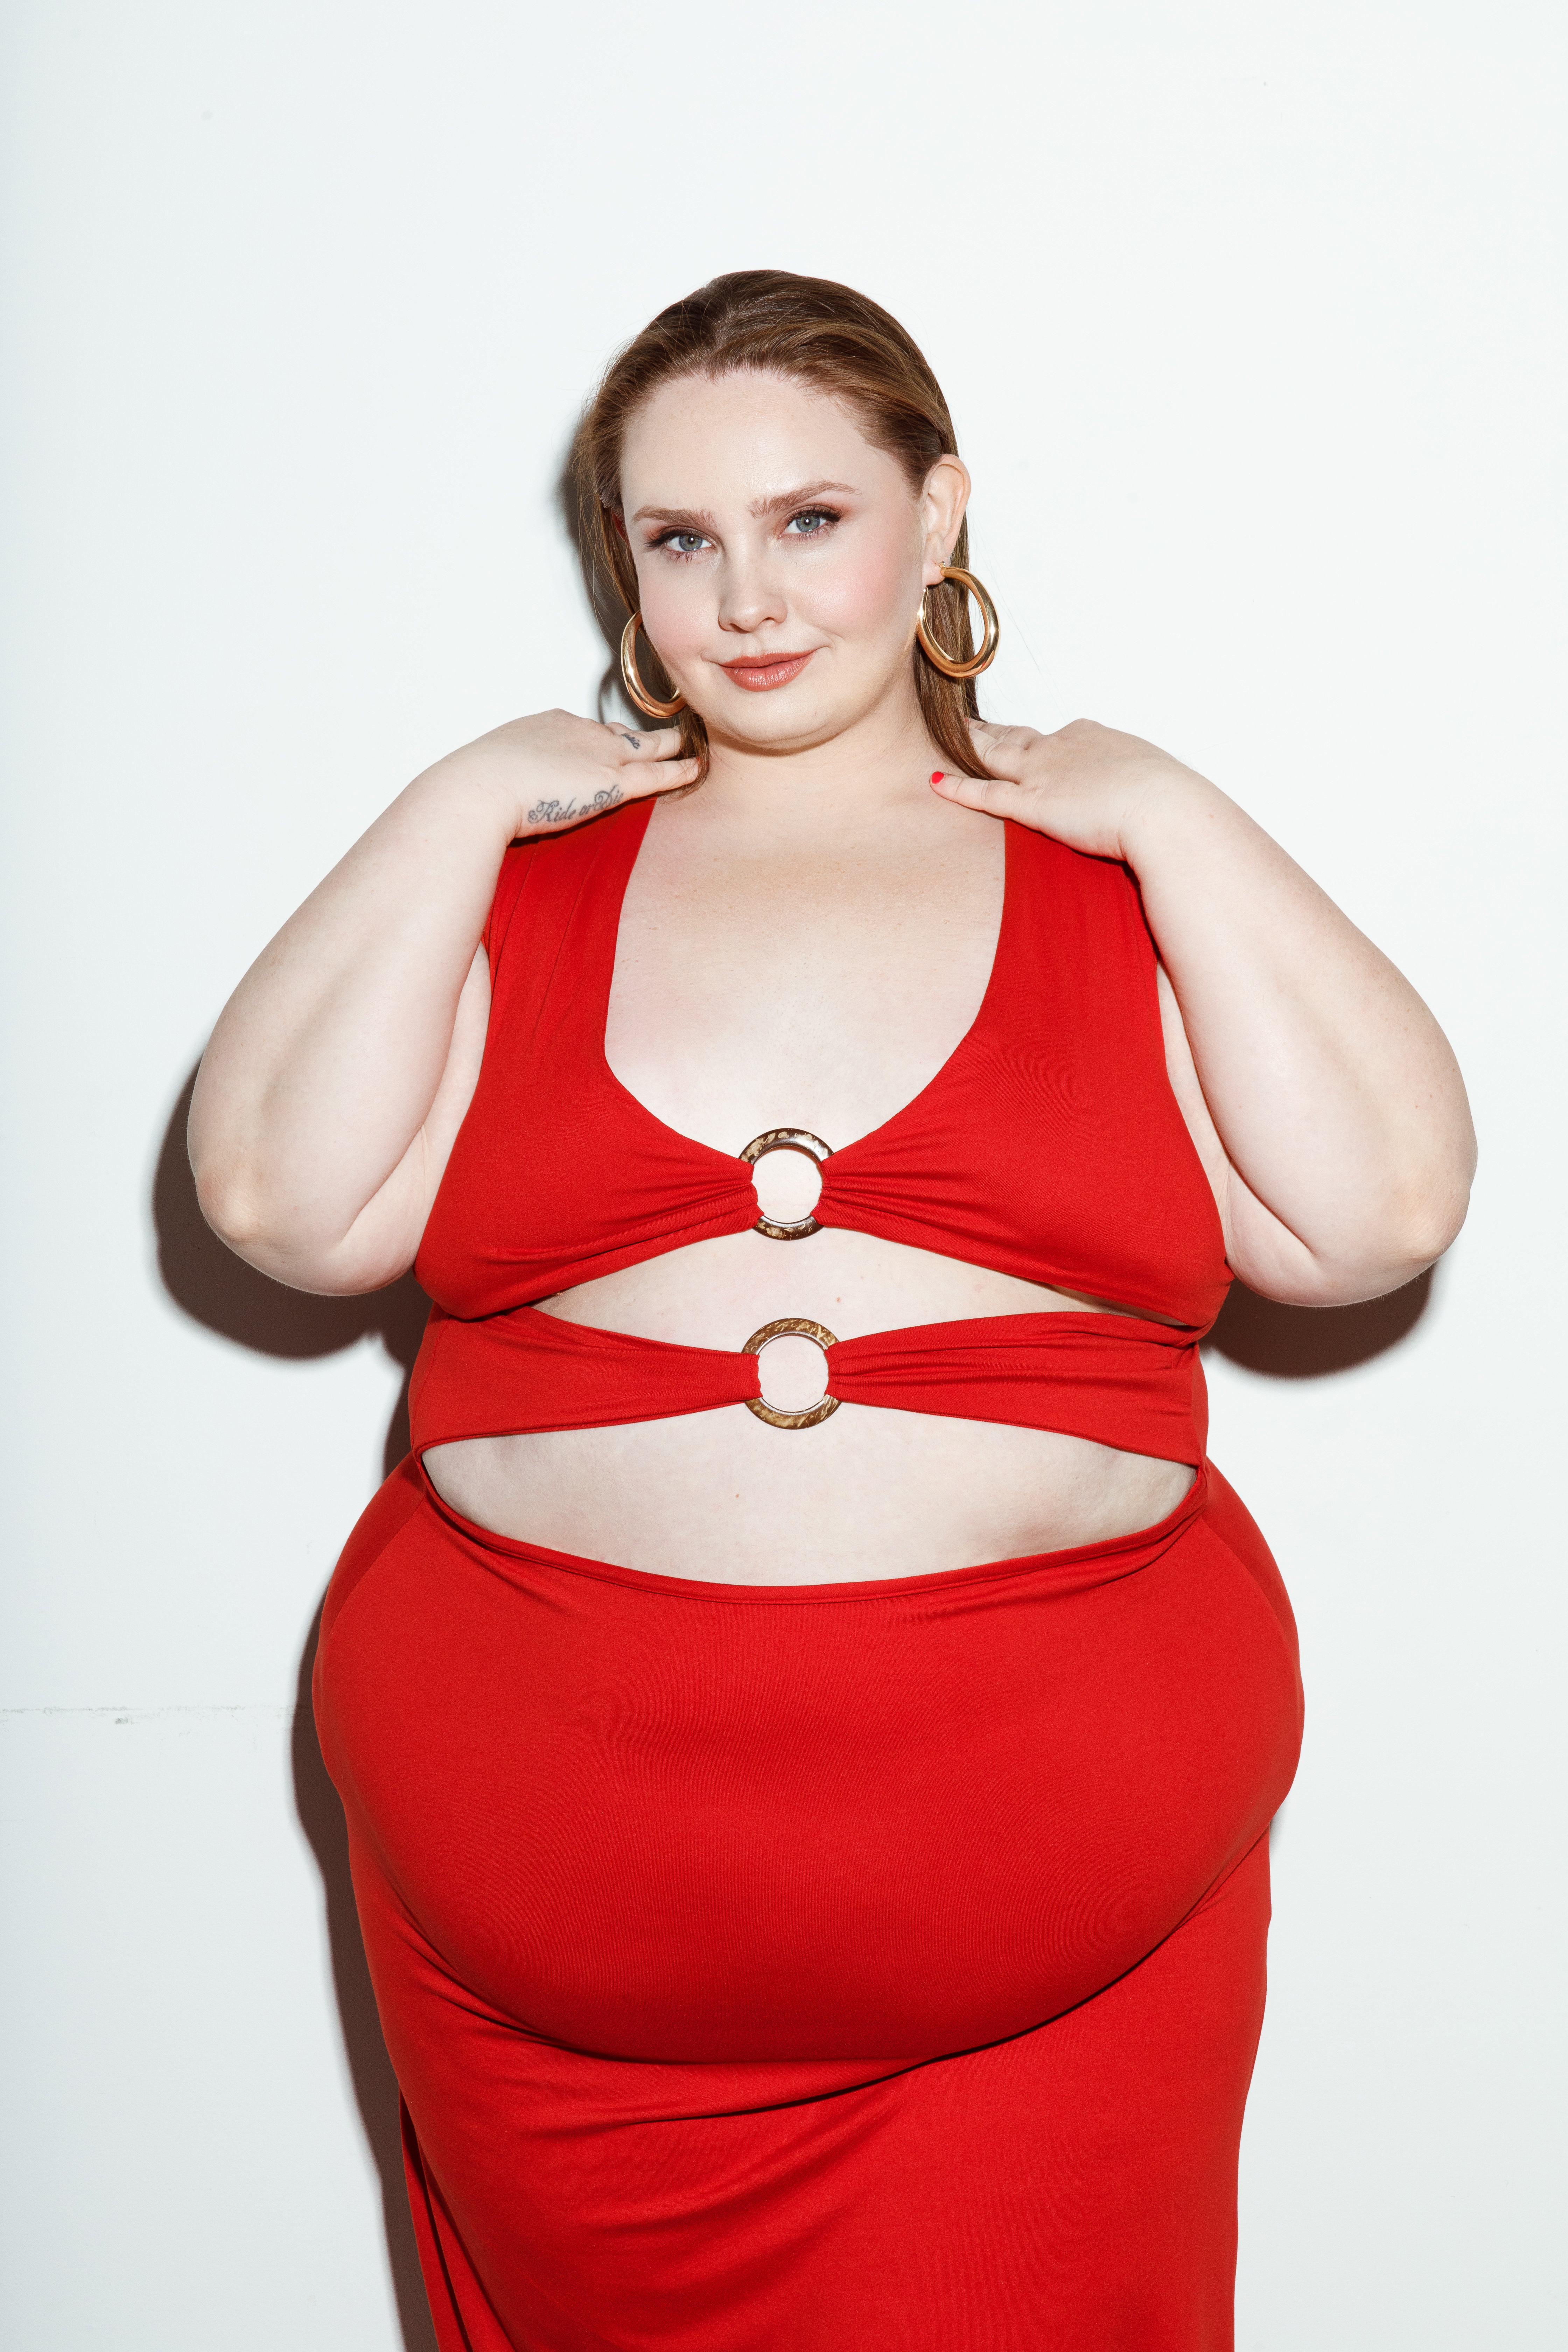 How to Make a Comp Card for Plus Size Models